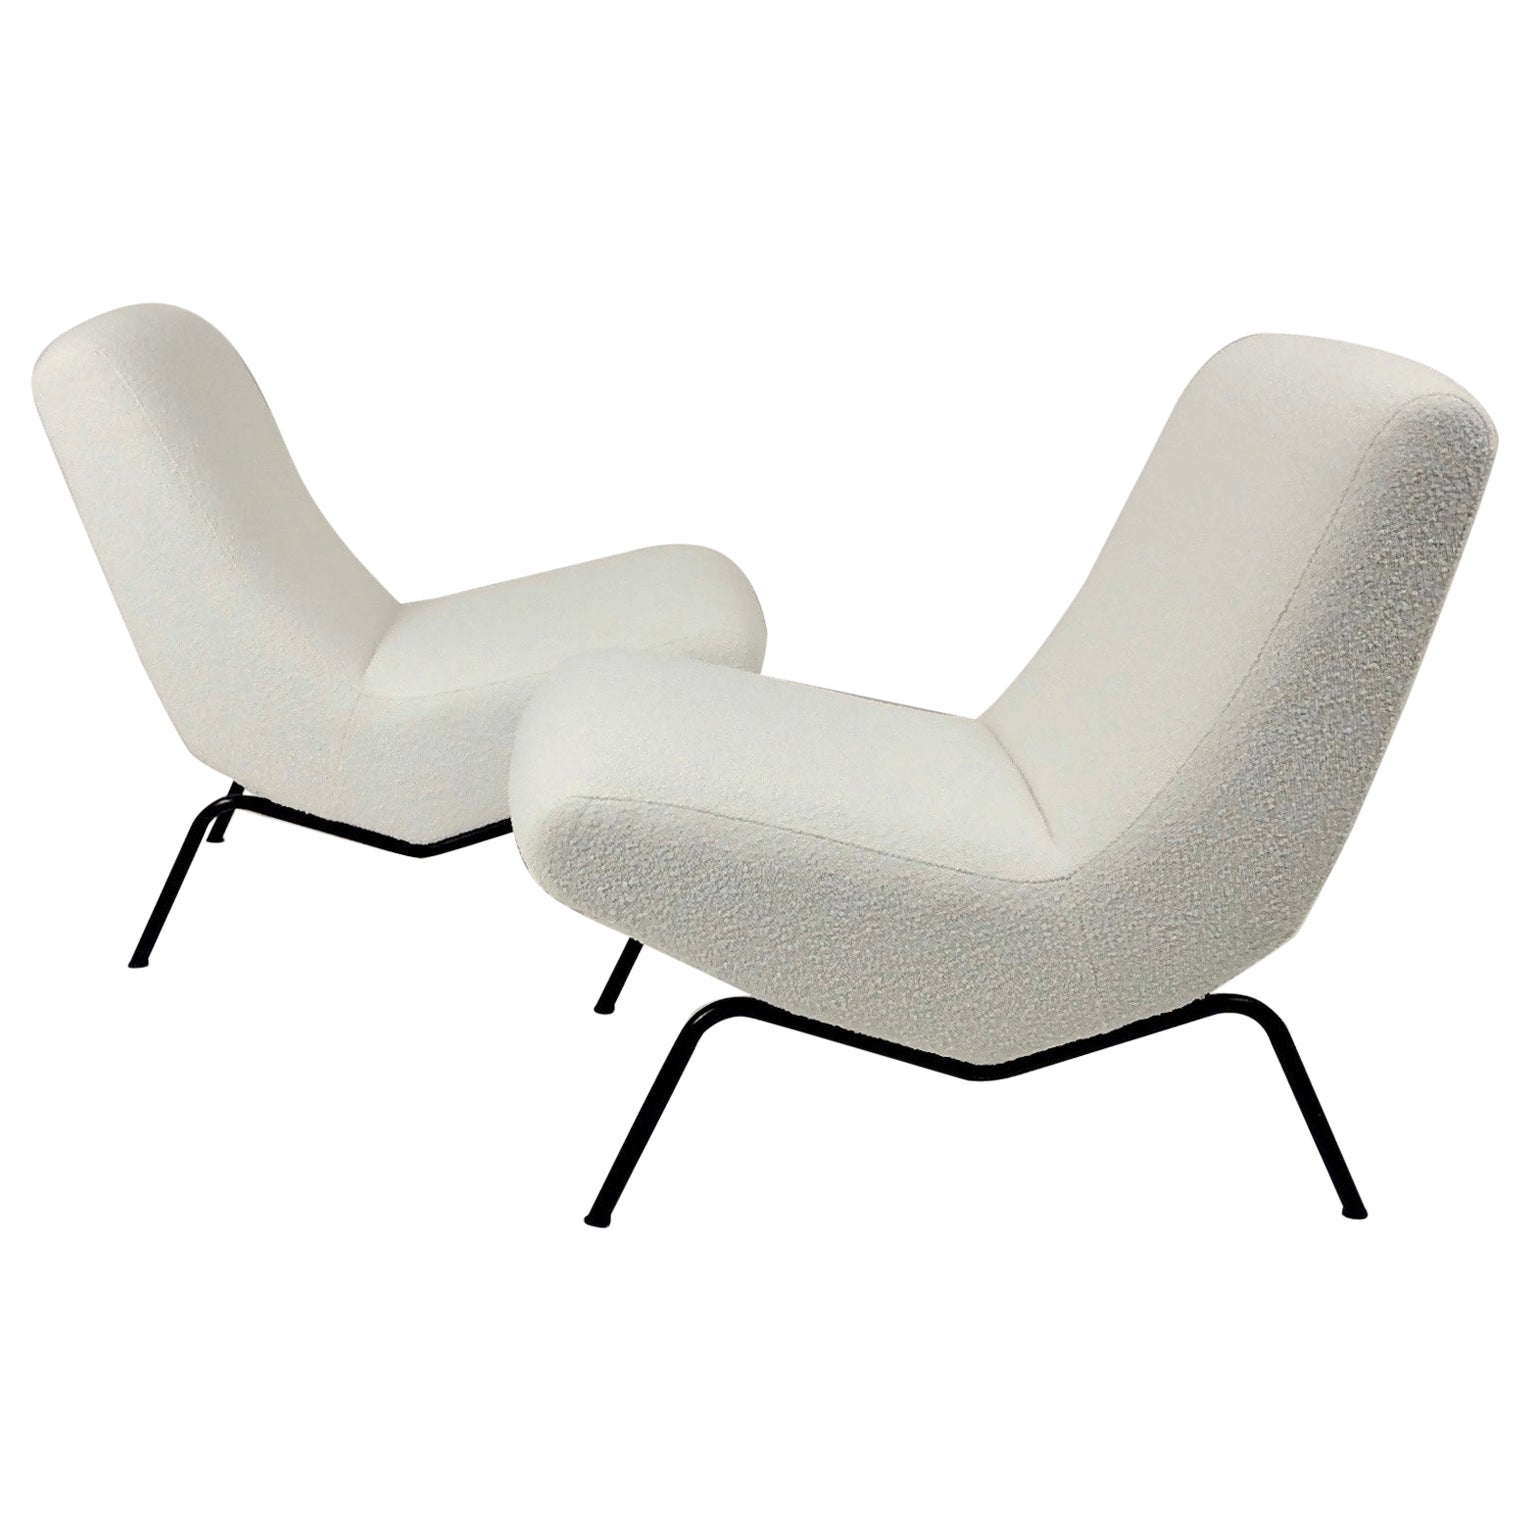 Nice Pierre Paulin pair of lounge chairs, CM194 model for Thonet, circa 1957, France.
Black metal structure, straps and foam.
New upholstery, new white boucle fabric.
Dimensions: 78 cm H, 85 cm D, 63 cm W, seat height: 42 cm.
Bibilography: